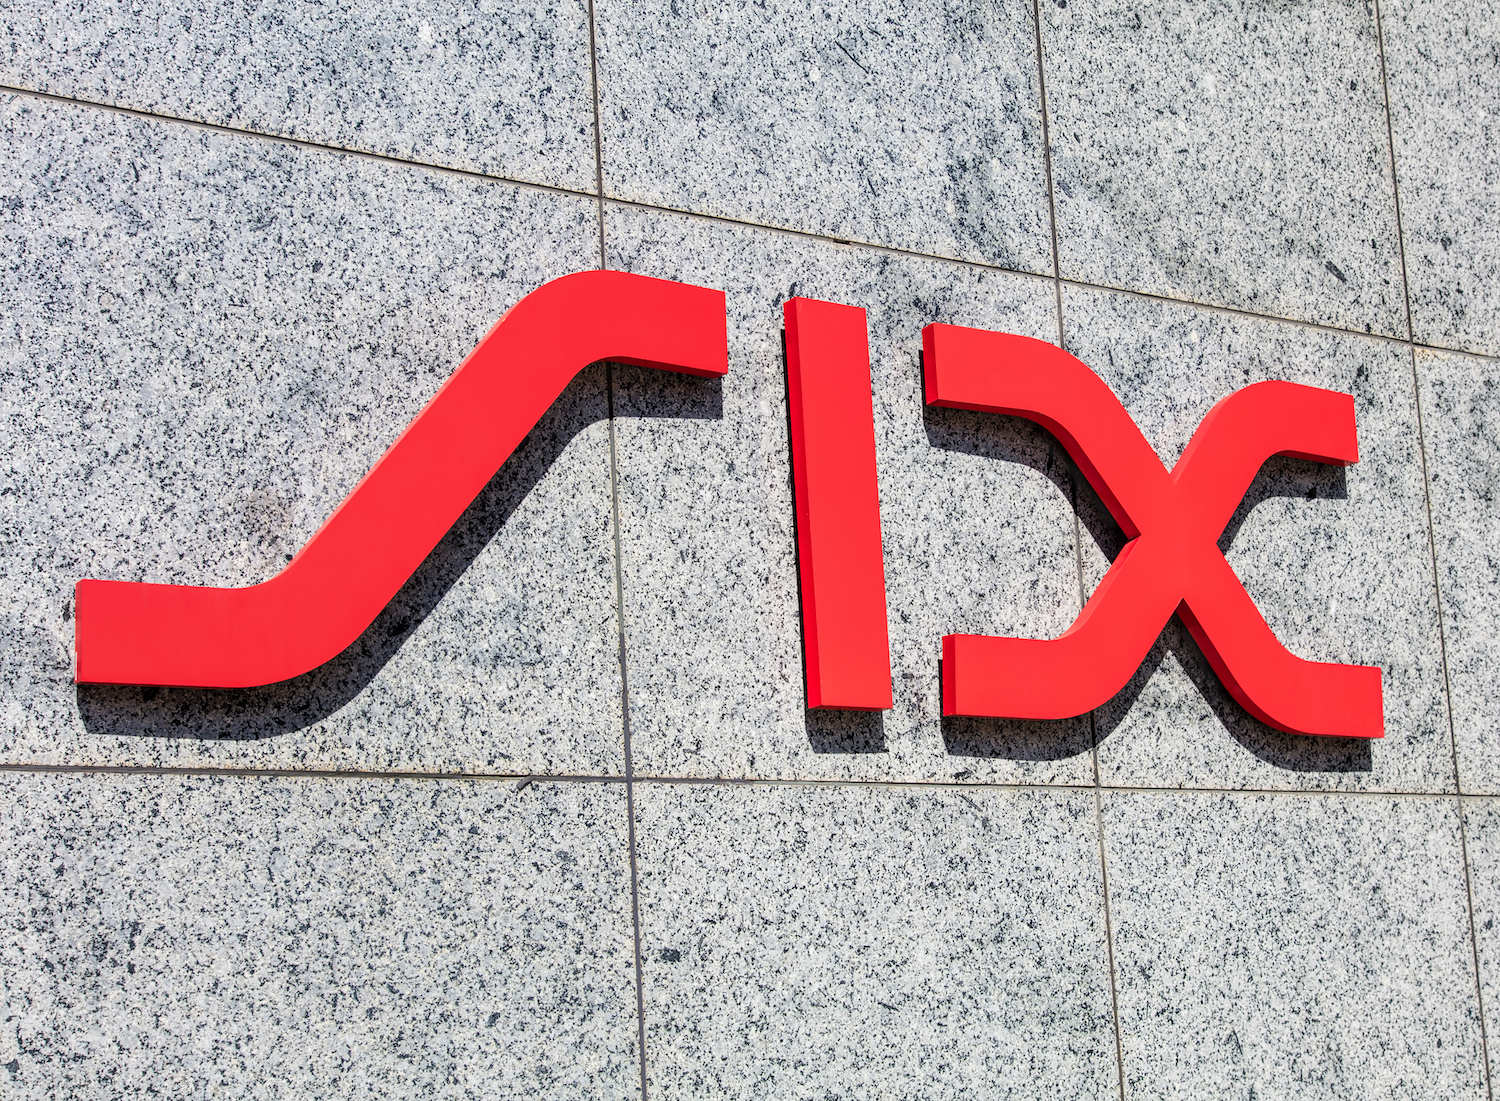 Swiss Stock Exchange SIX Lines Up Buyers For ‘Initial Digital Offering’